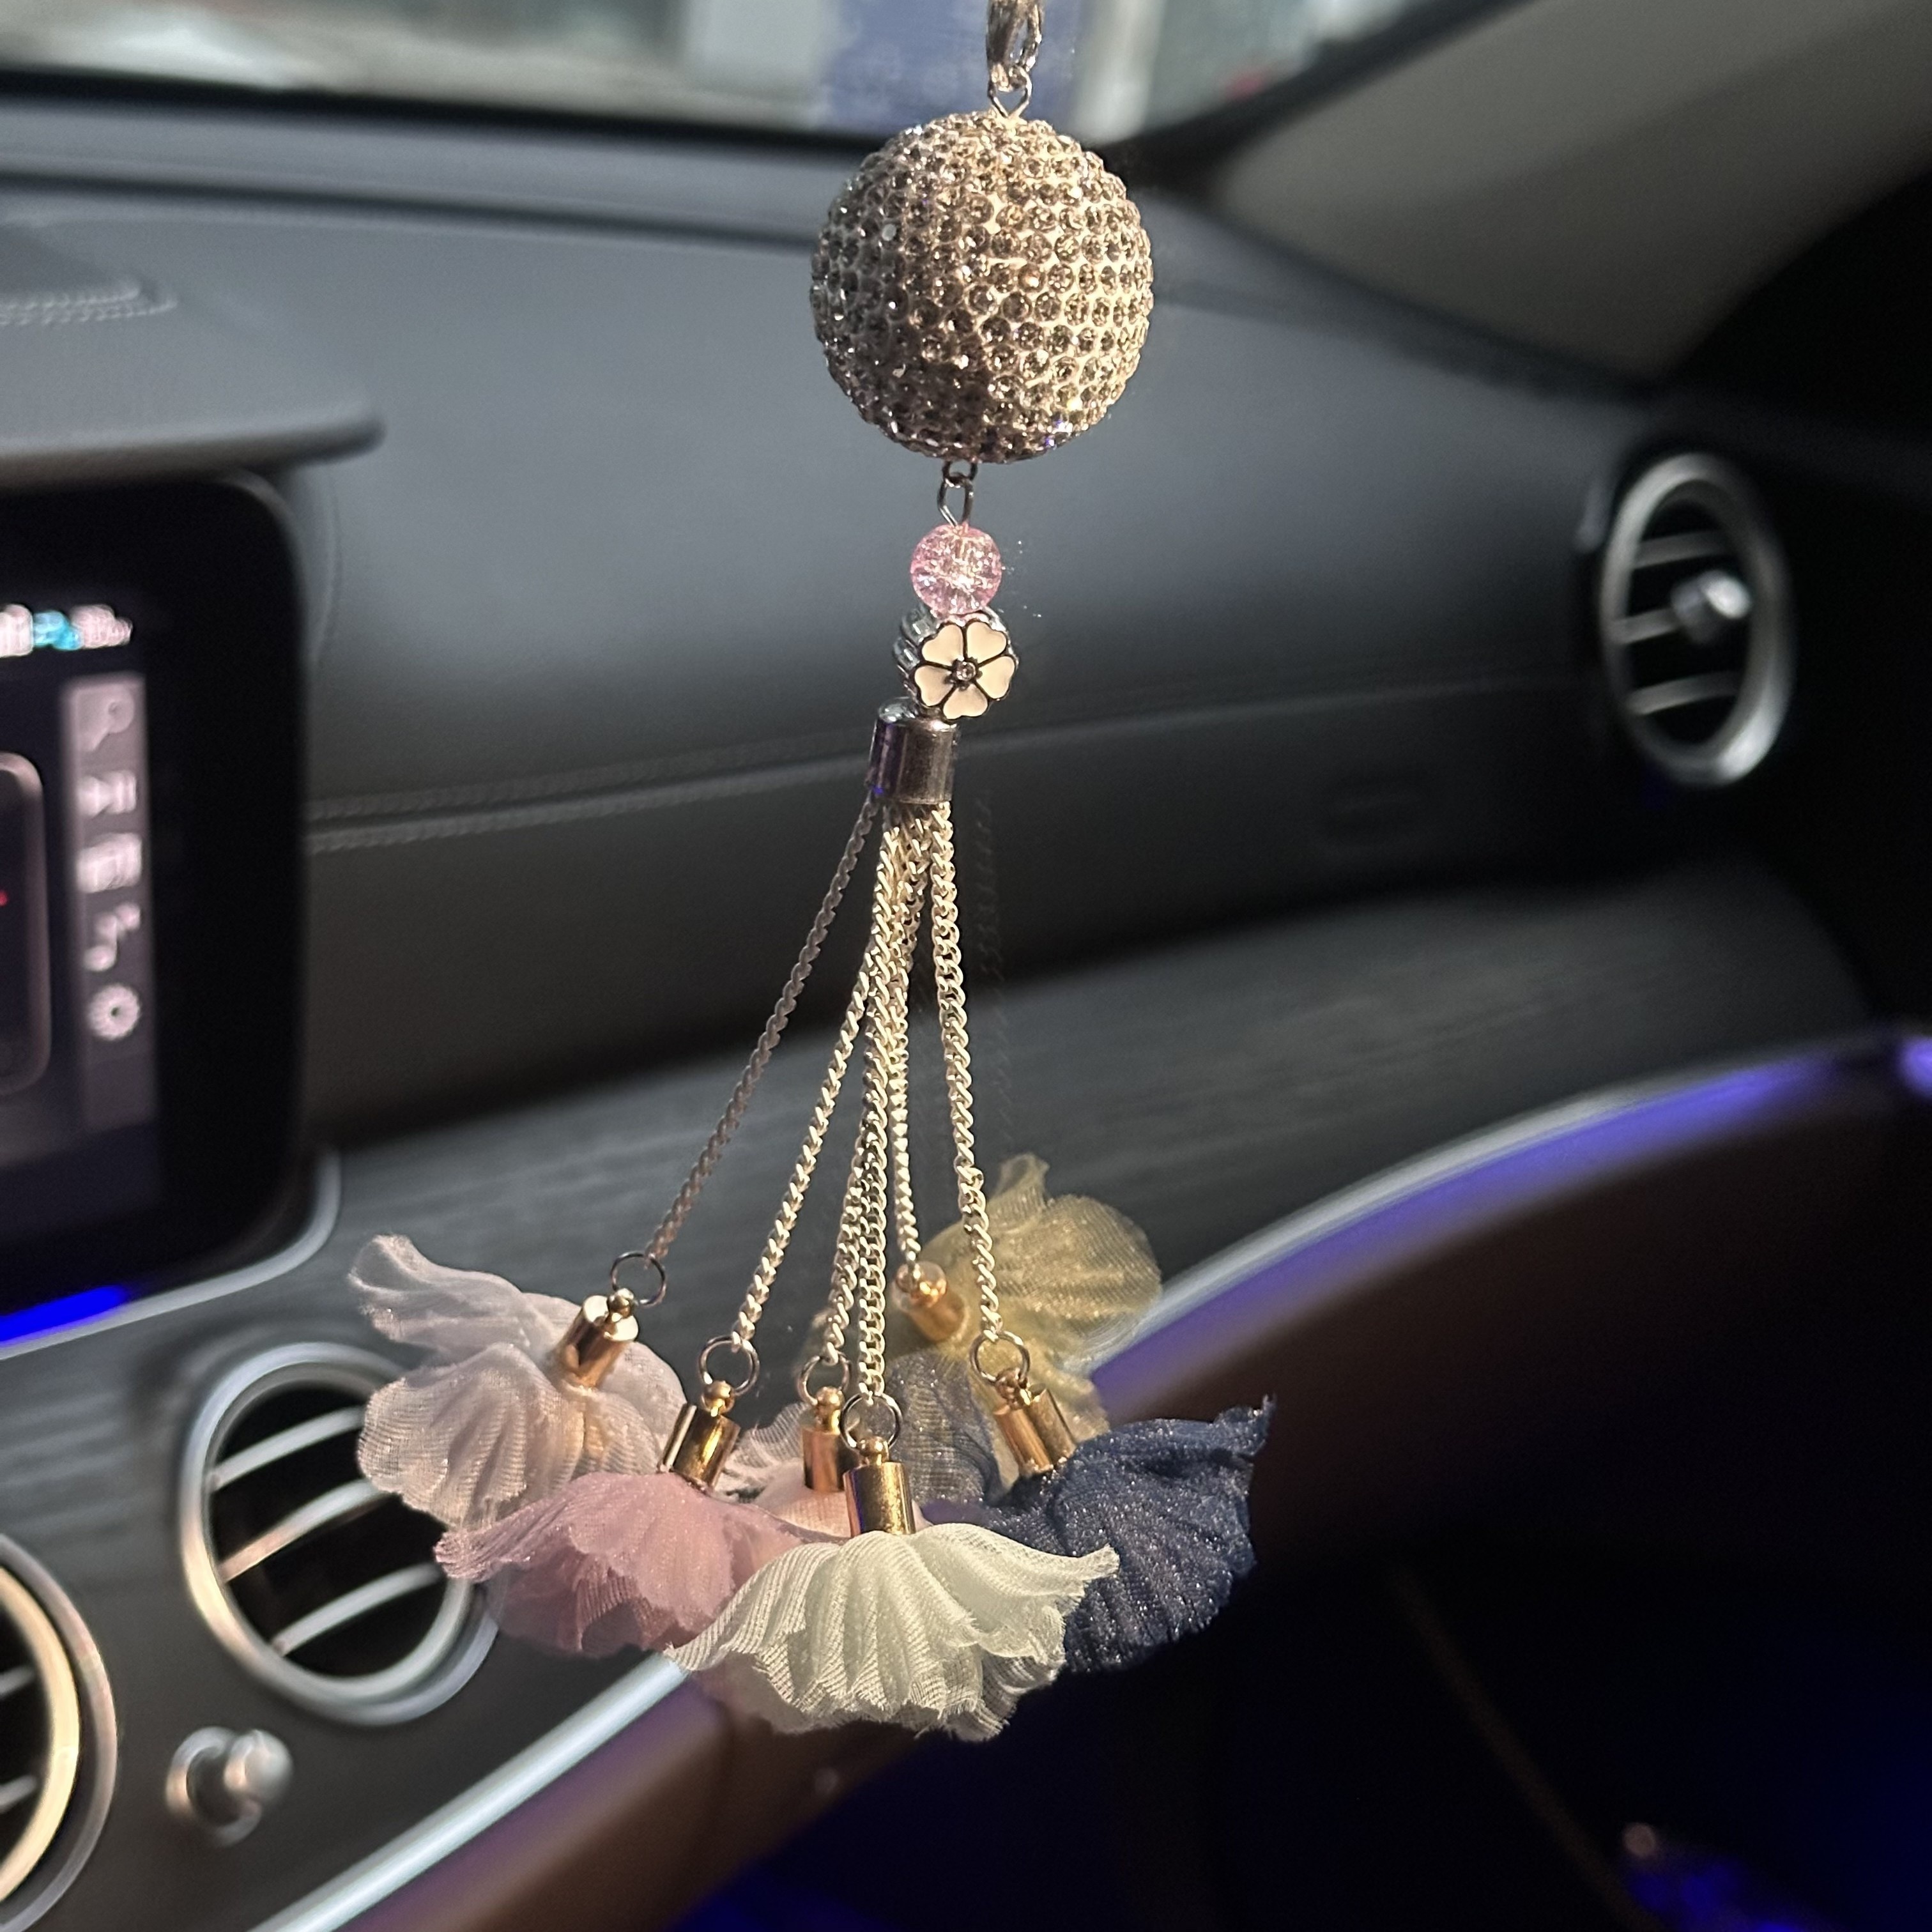 Bling Heart Diamond Car Accessories, Crystal Car Rear View Mirror Charms  Car Decoration Valentine's Day Gifts Lucky Hanging Interior Ornament